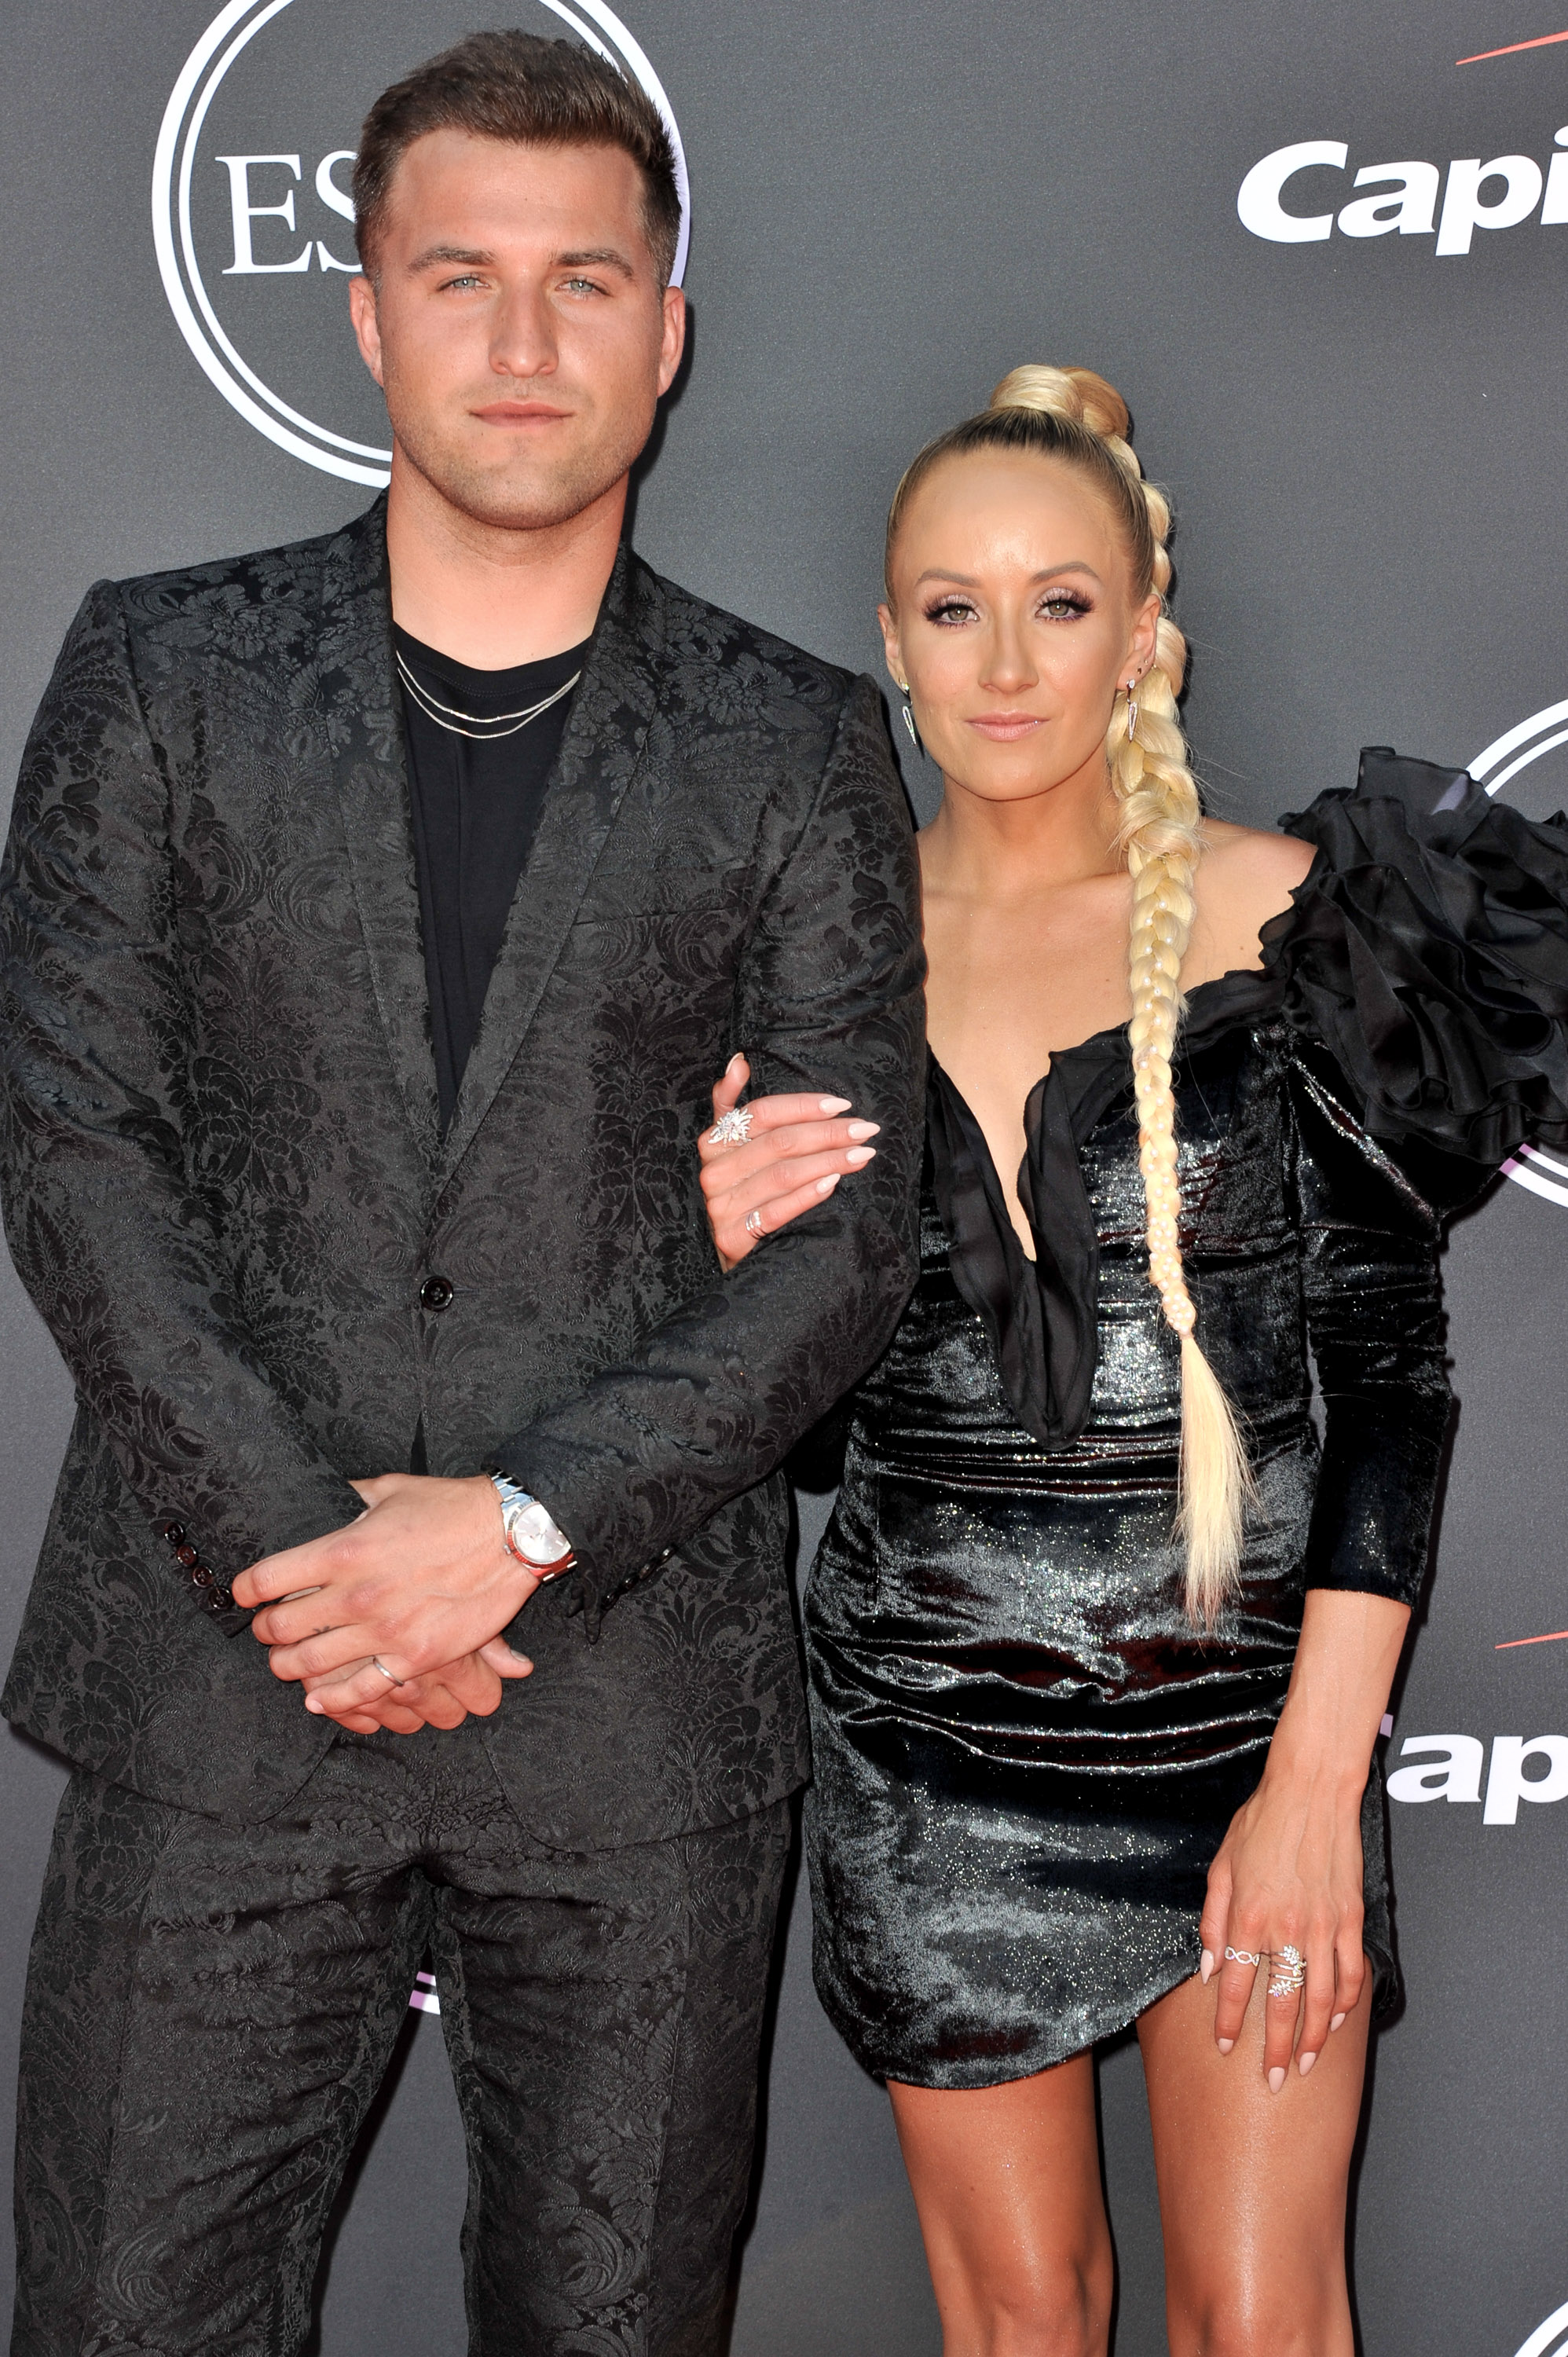 Sam Martin and Nastia Liukin attend the 2019 ESPY Awards at Microsoft Theater on July 10, 2019, in Los Angeles, California. | Source: Getty Images